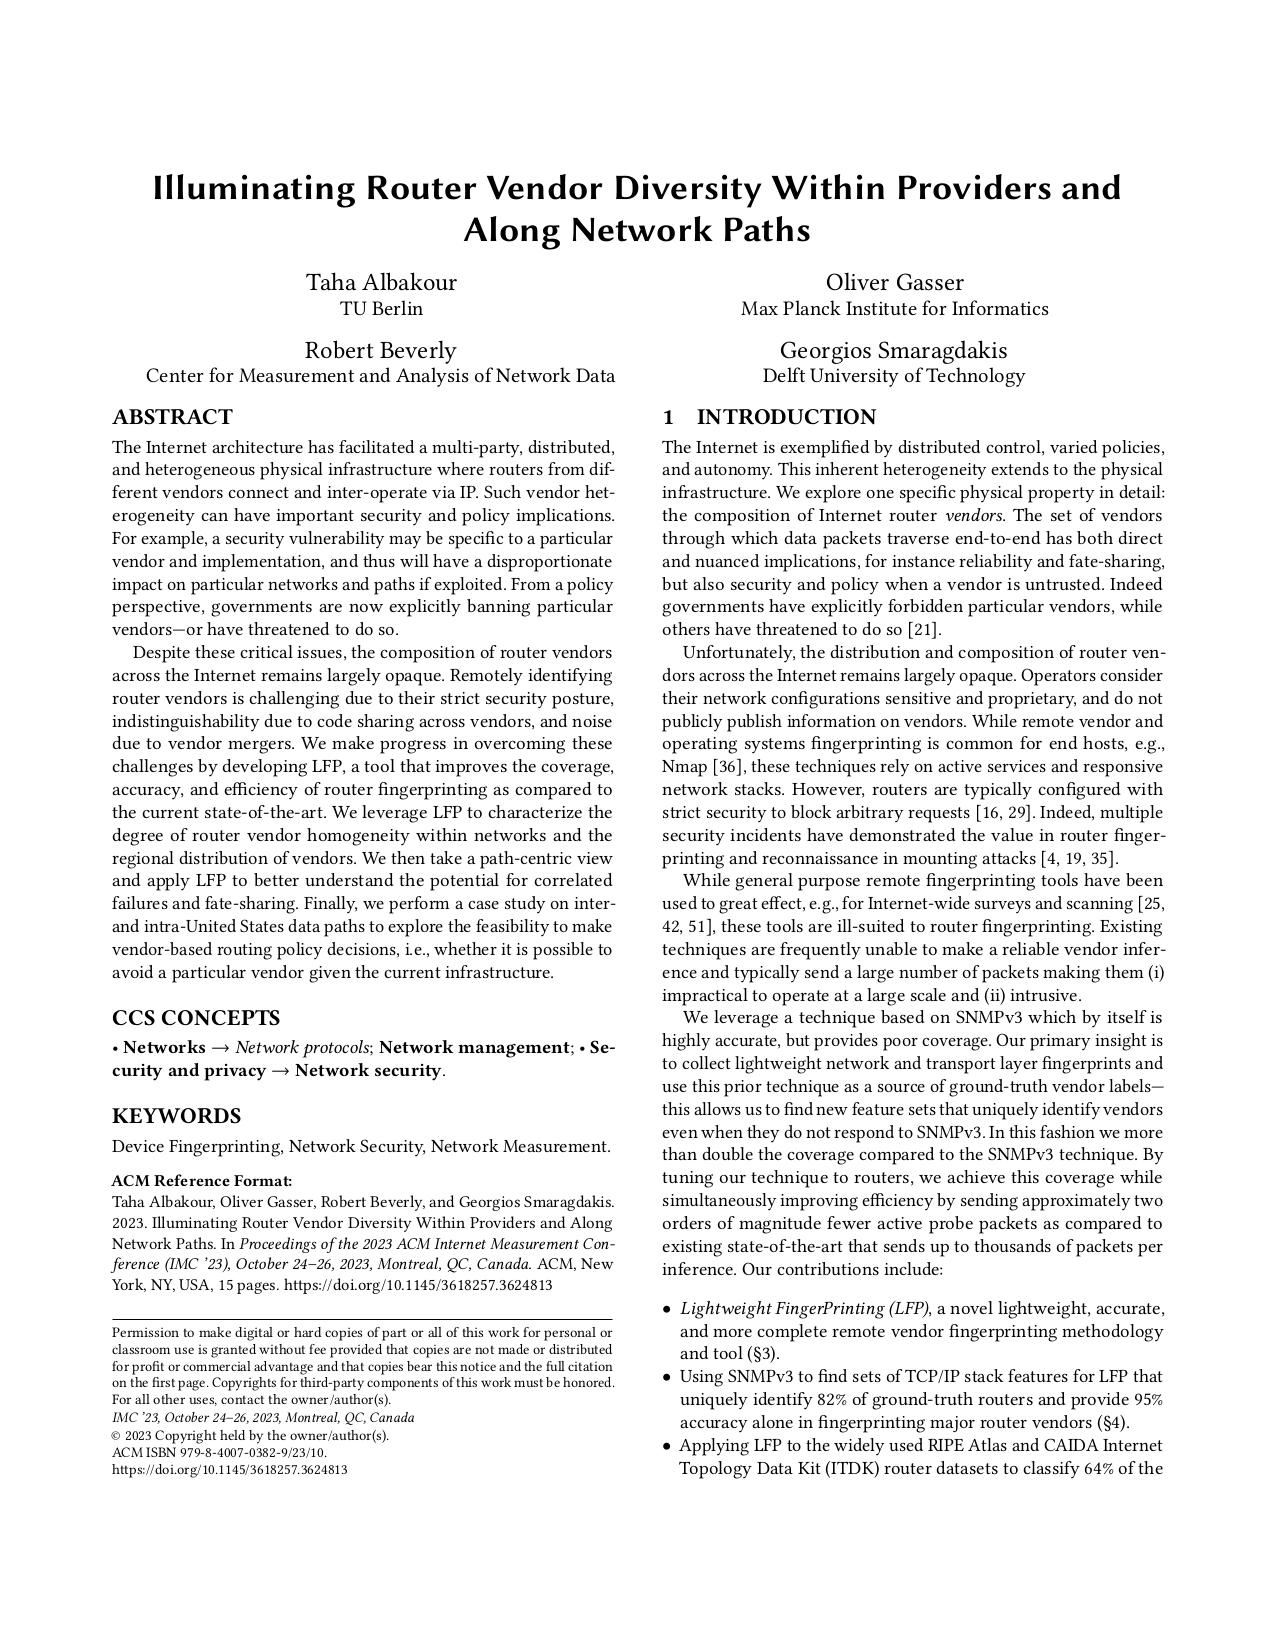 Download paper: Illuminating Router Vendor Diversity Within Providers and Along Network Paths